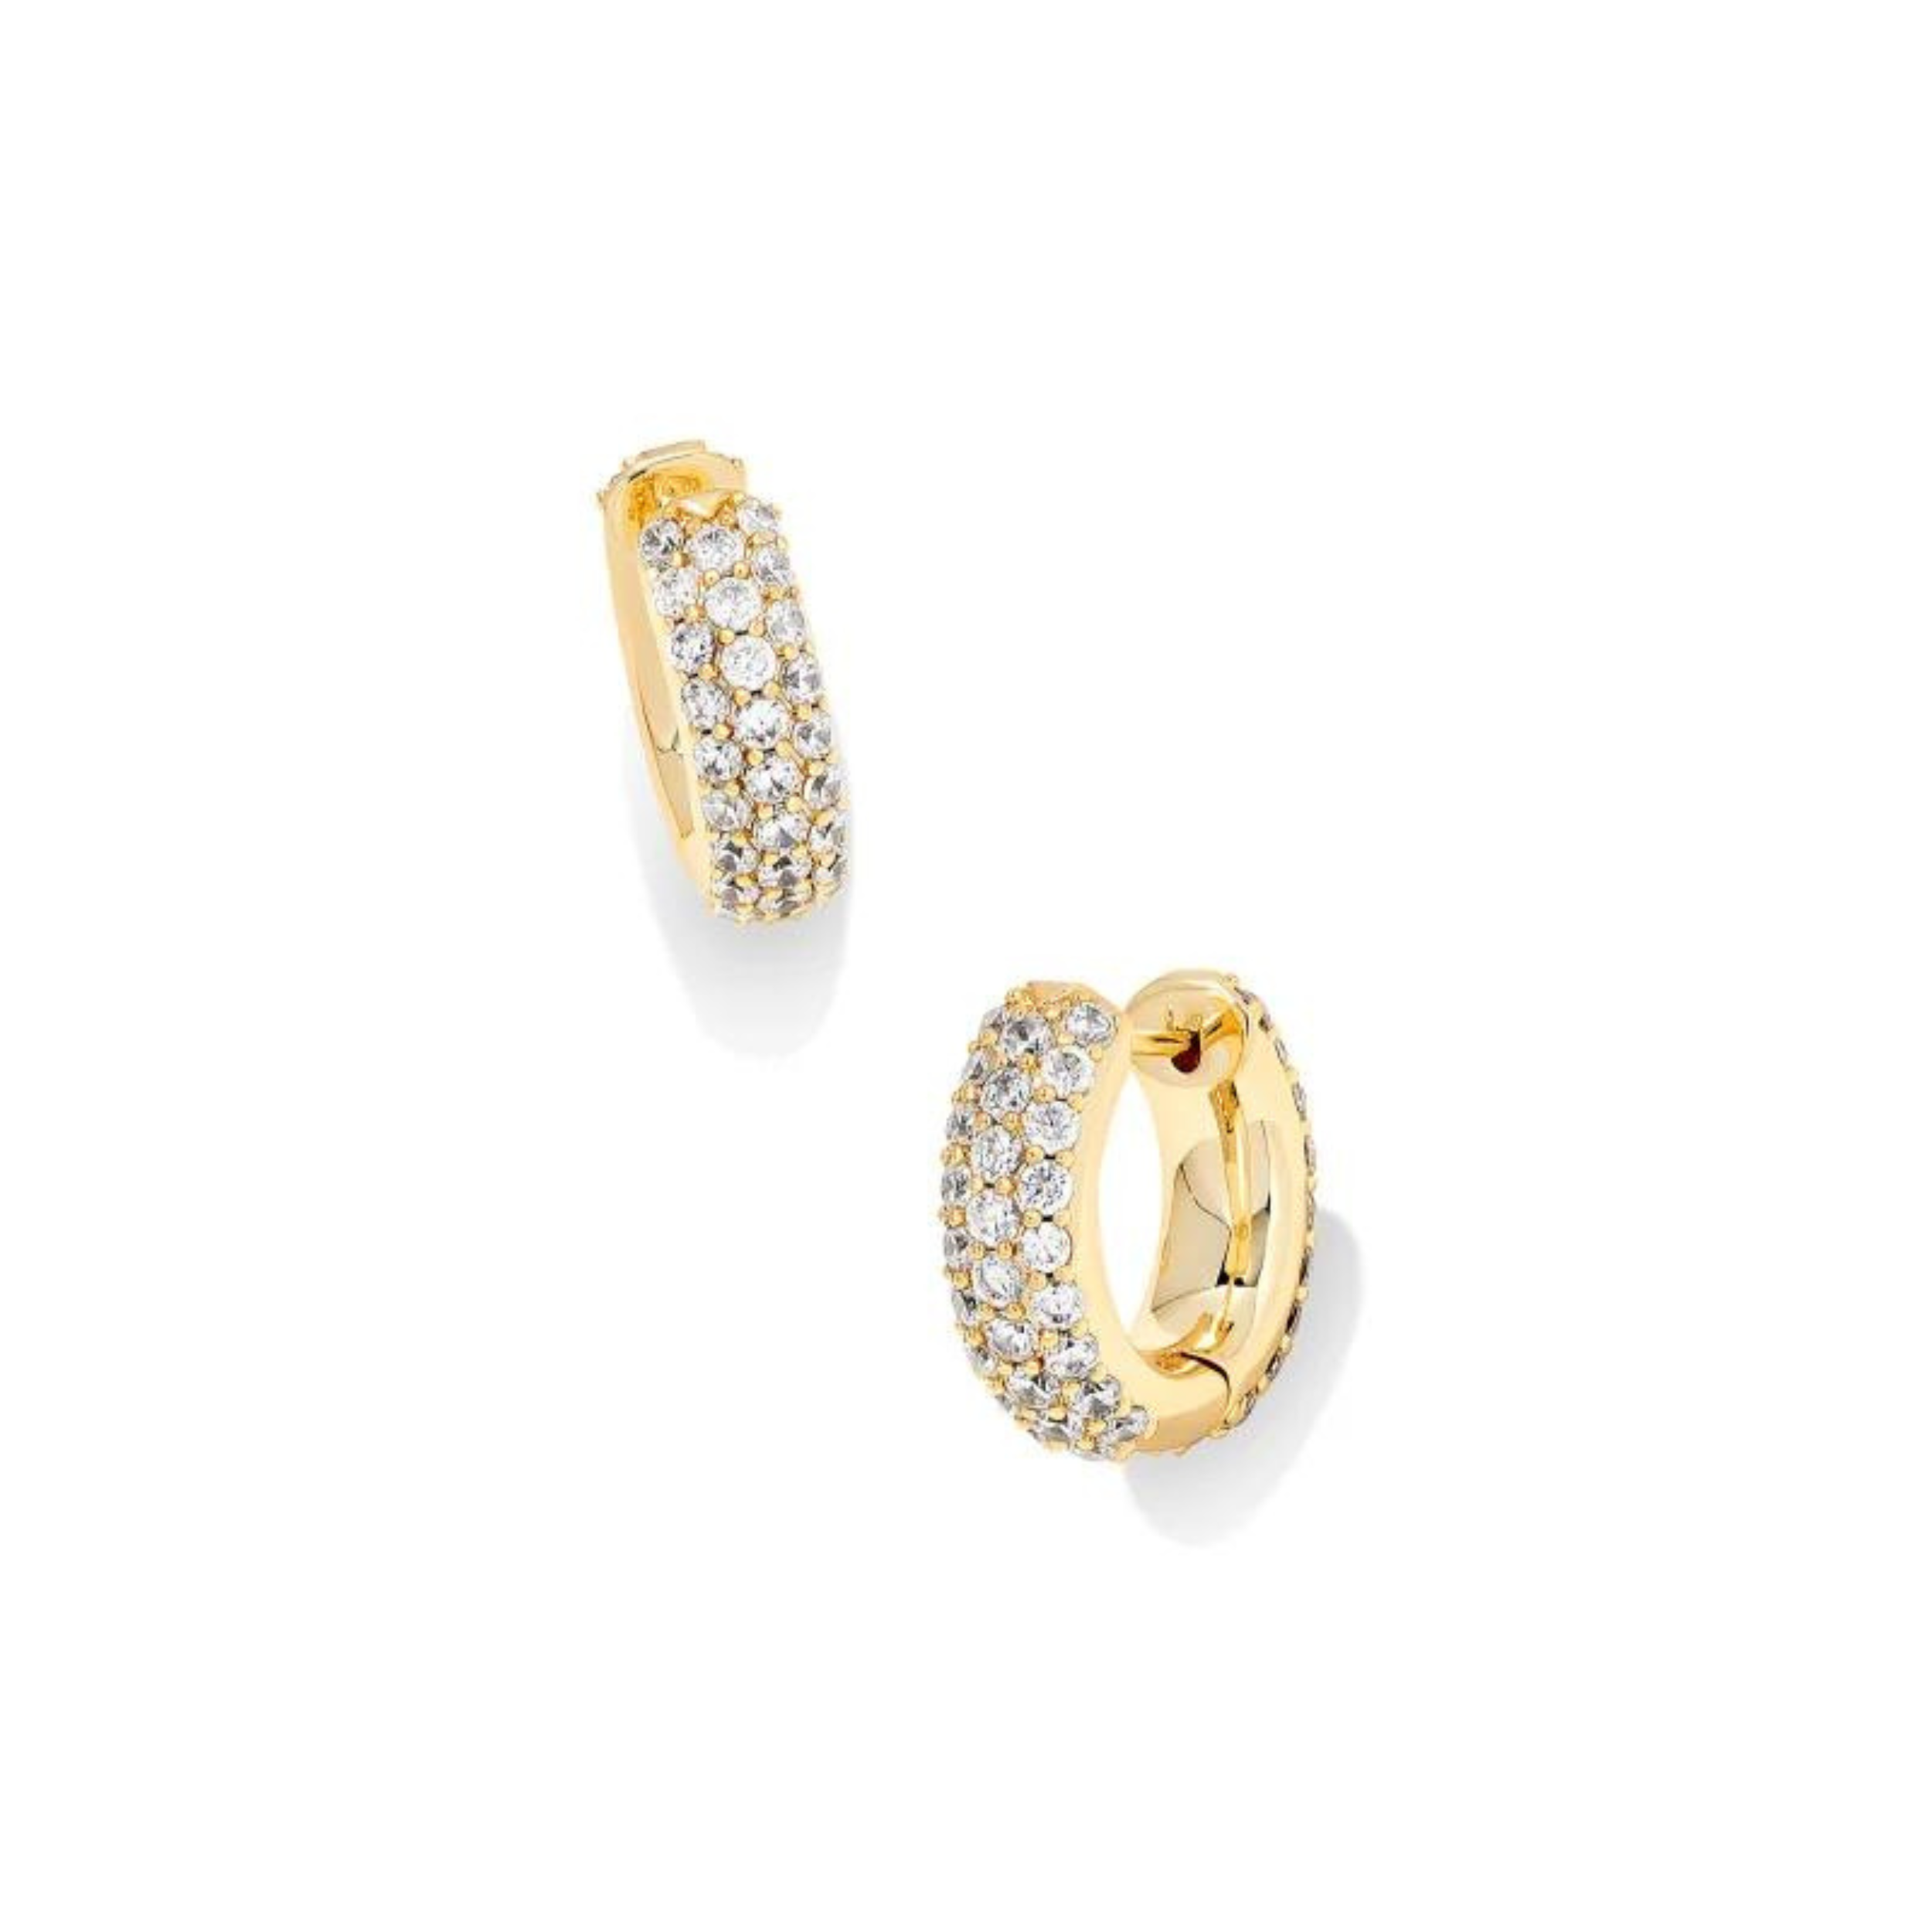 Gold crystal huggie earrings, pictured on a white background.